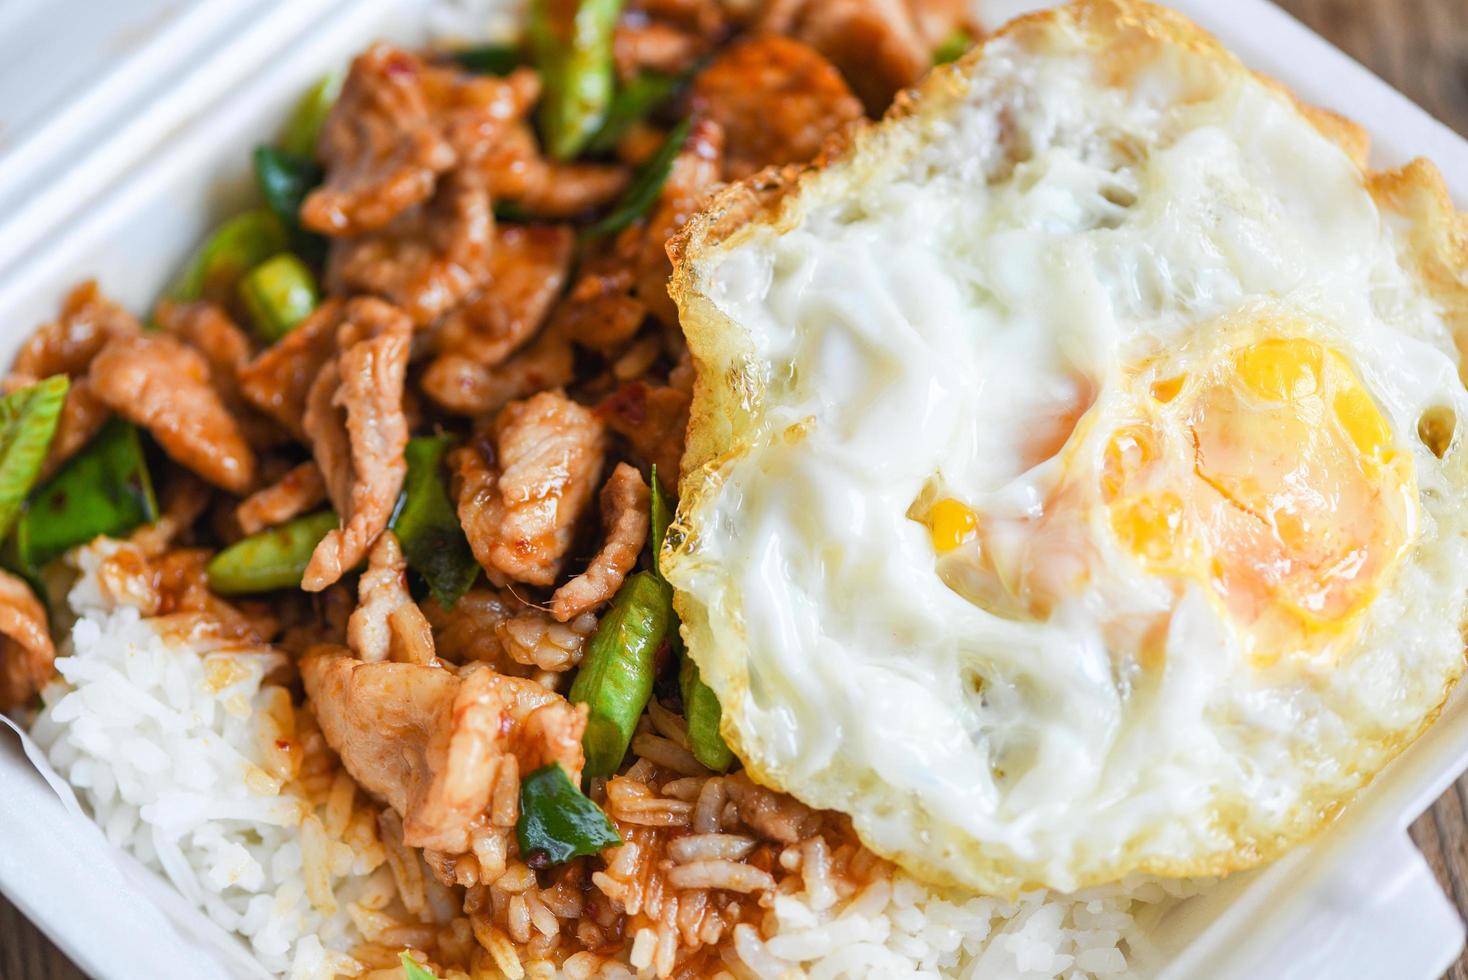 Stir fried pork with red curry paste and basil leaves with yardlong bean and fried egg topped in a plastic box, Thai food or Thai street food photo